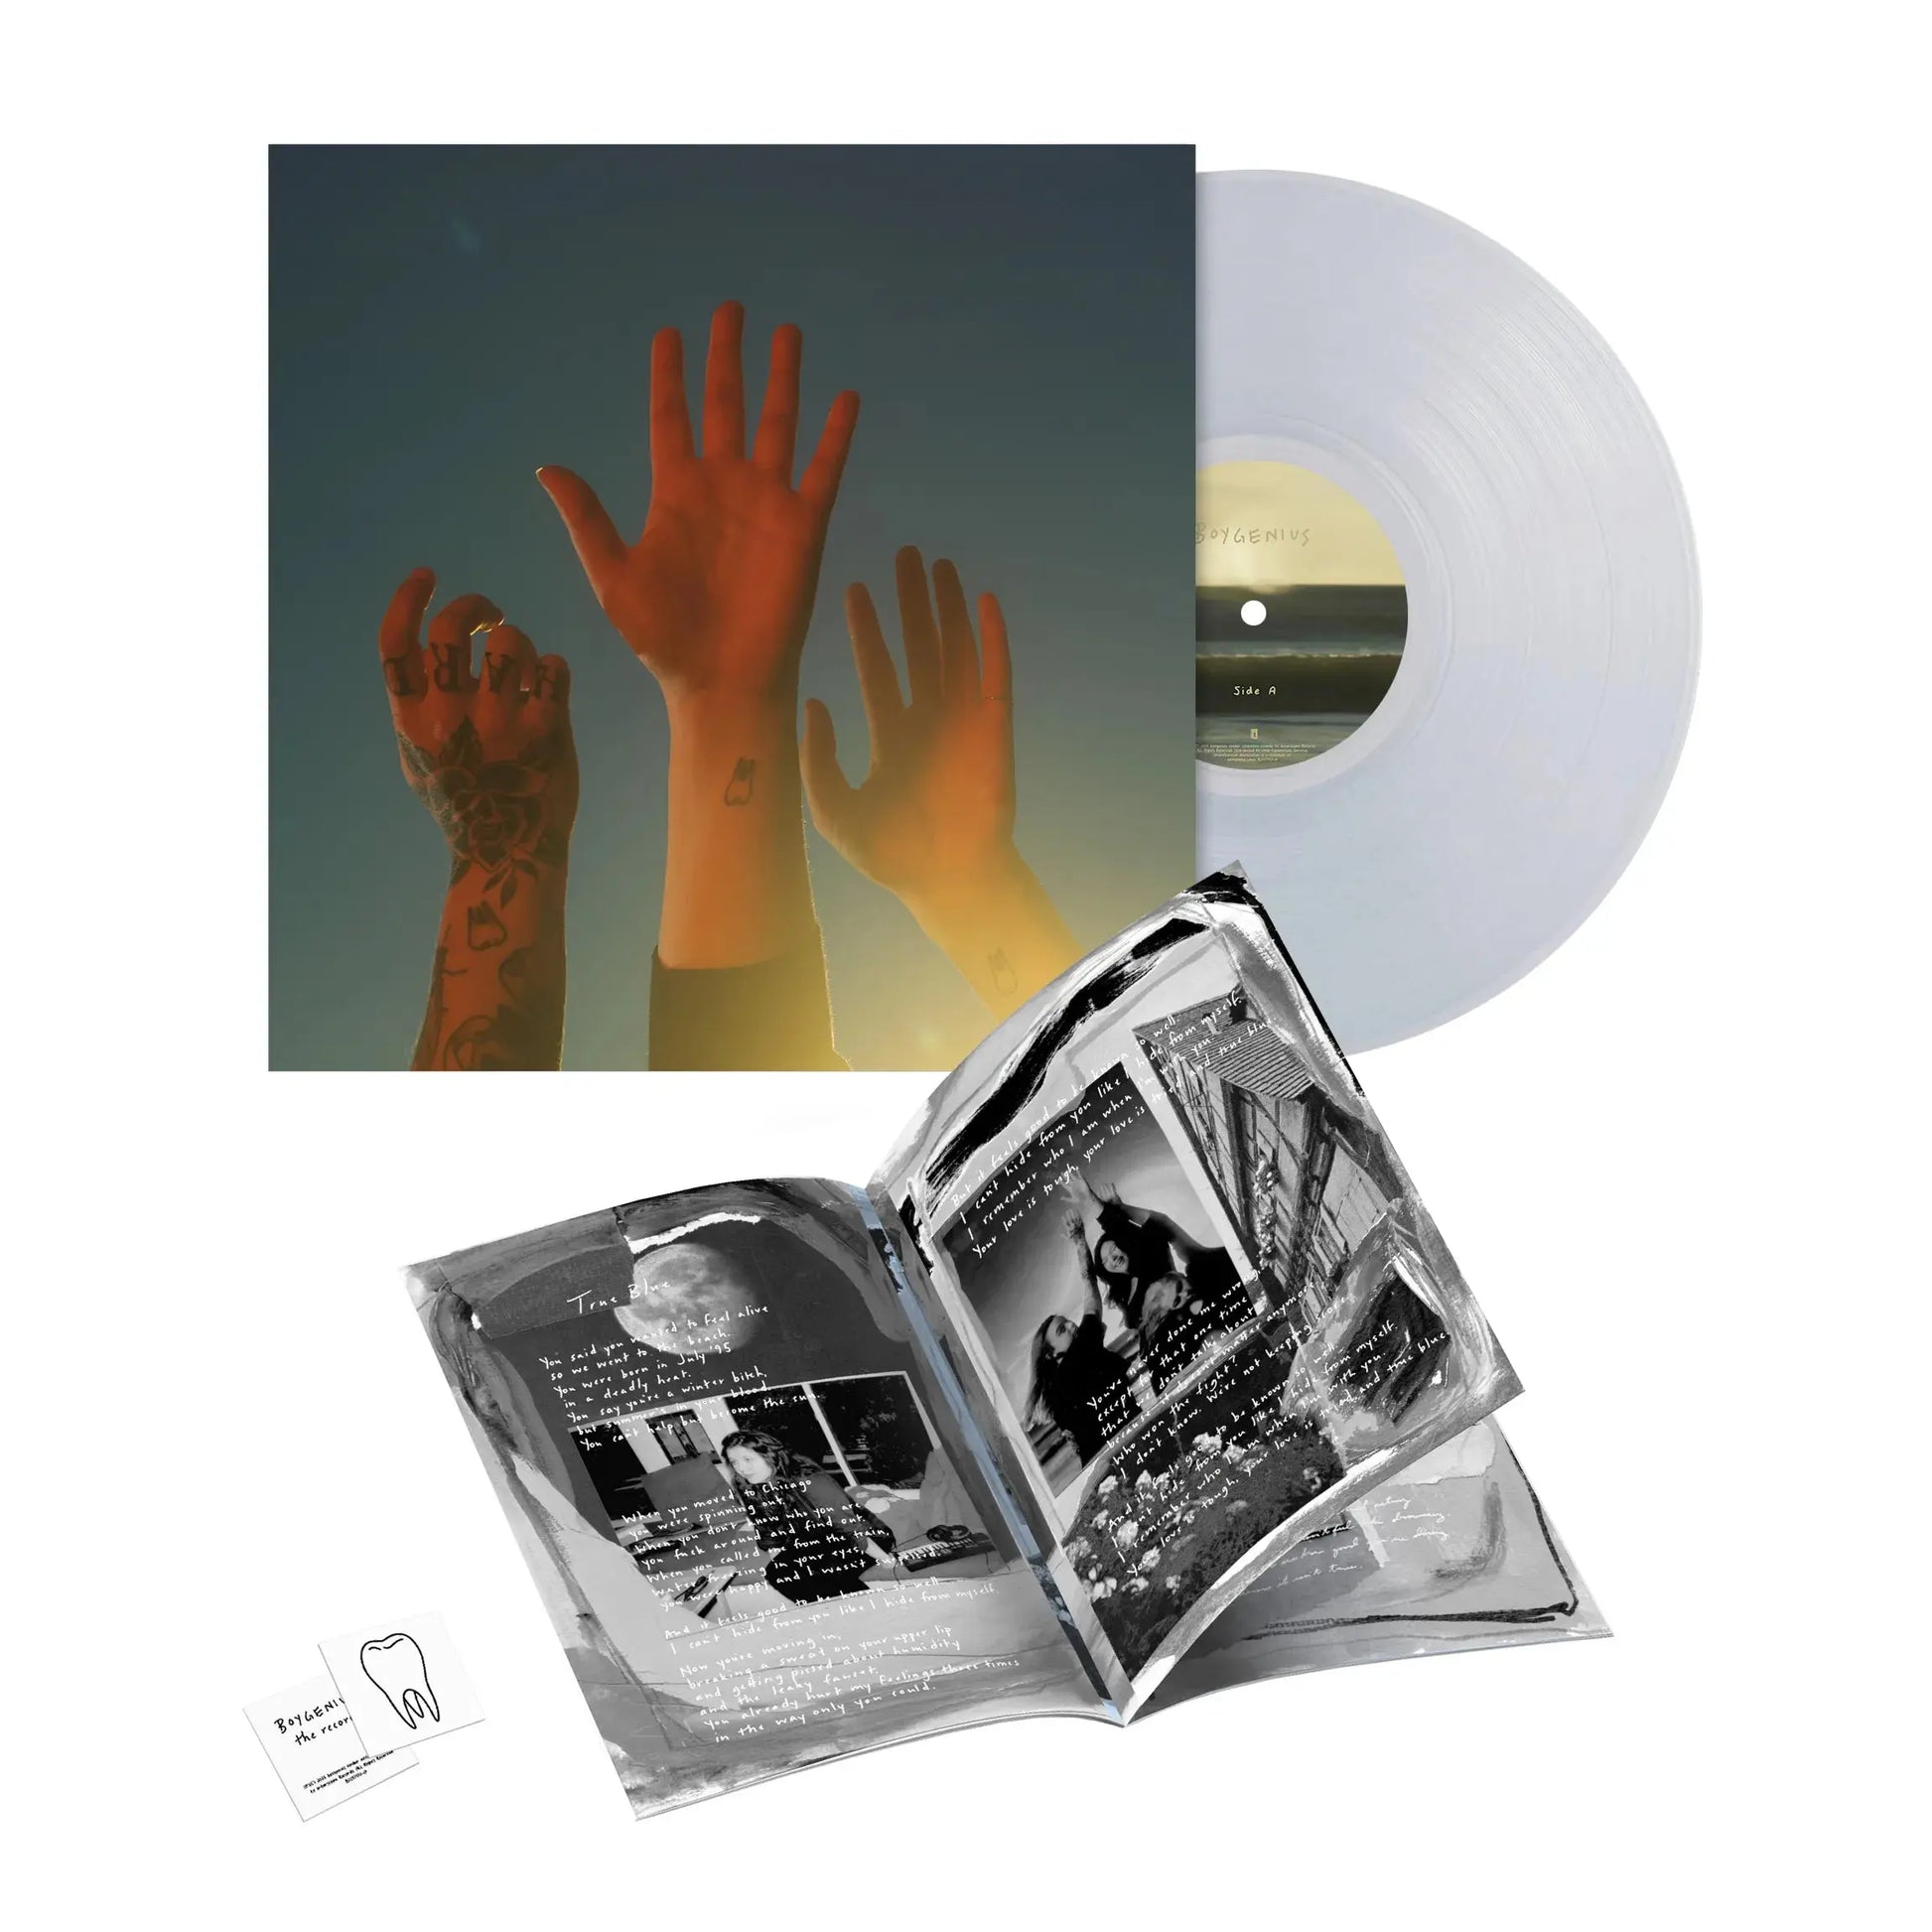 the record [Clear Vinyl]